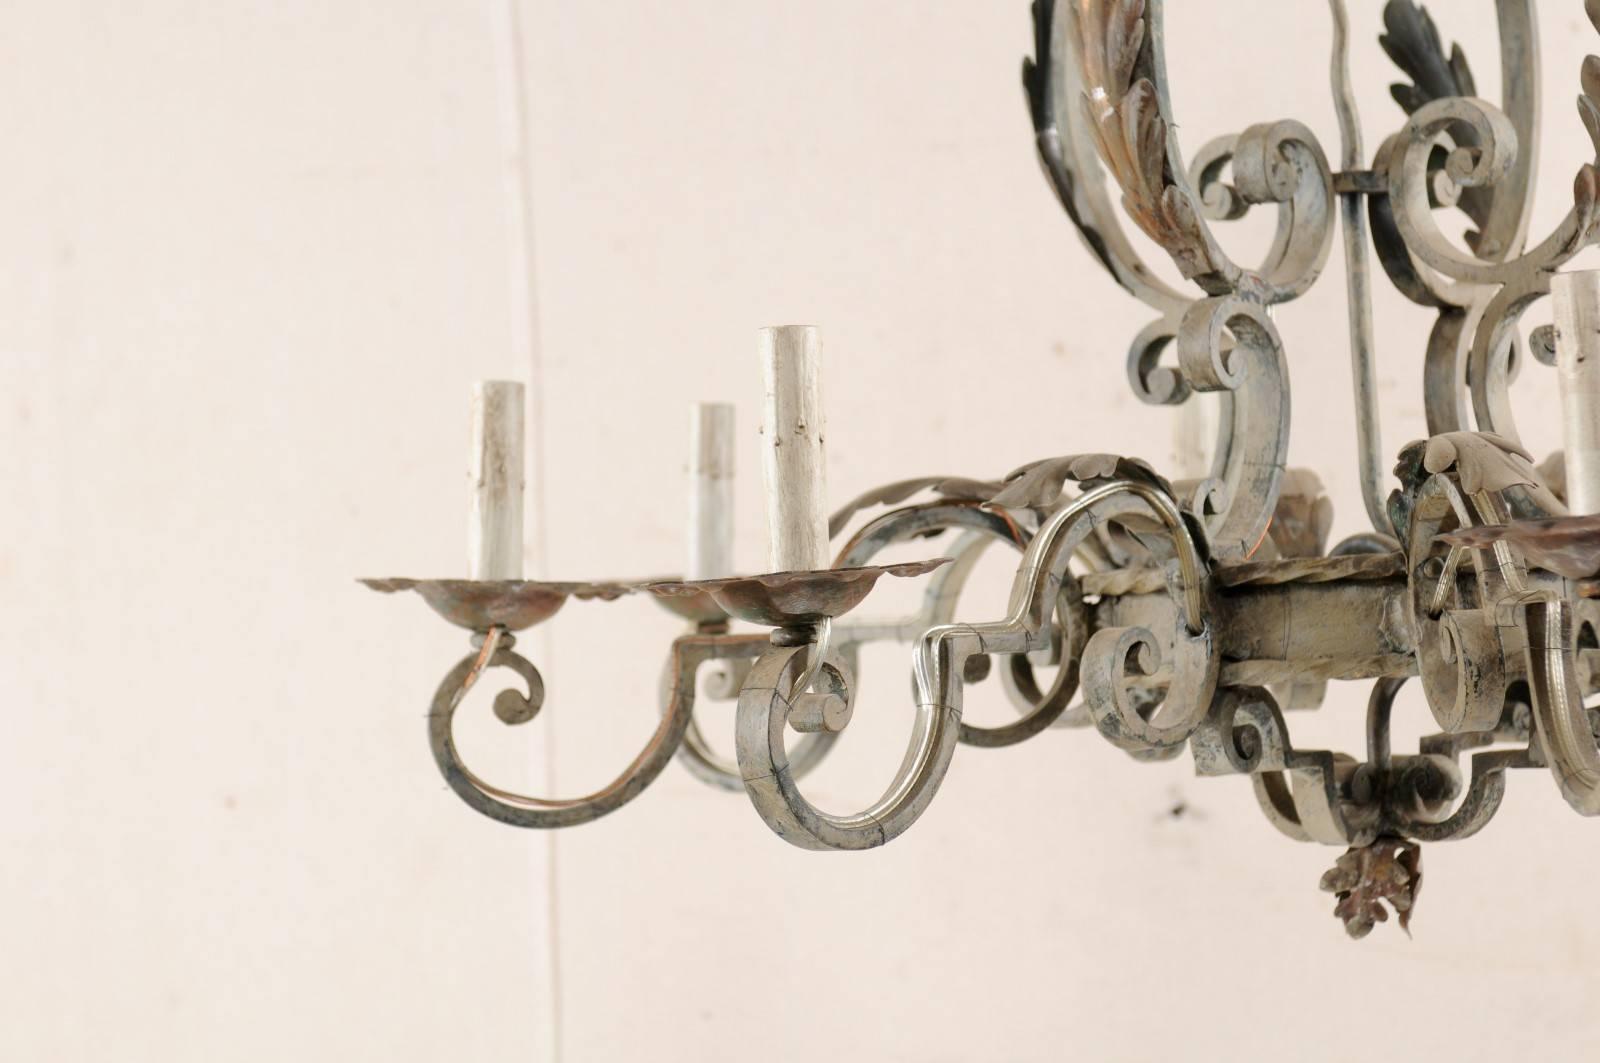 French Painted Iron Chandelier in a Scroll & Acanthus Leaf Motif, Rewired for US In Good Condition For Sale In Atlanta, GA